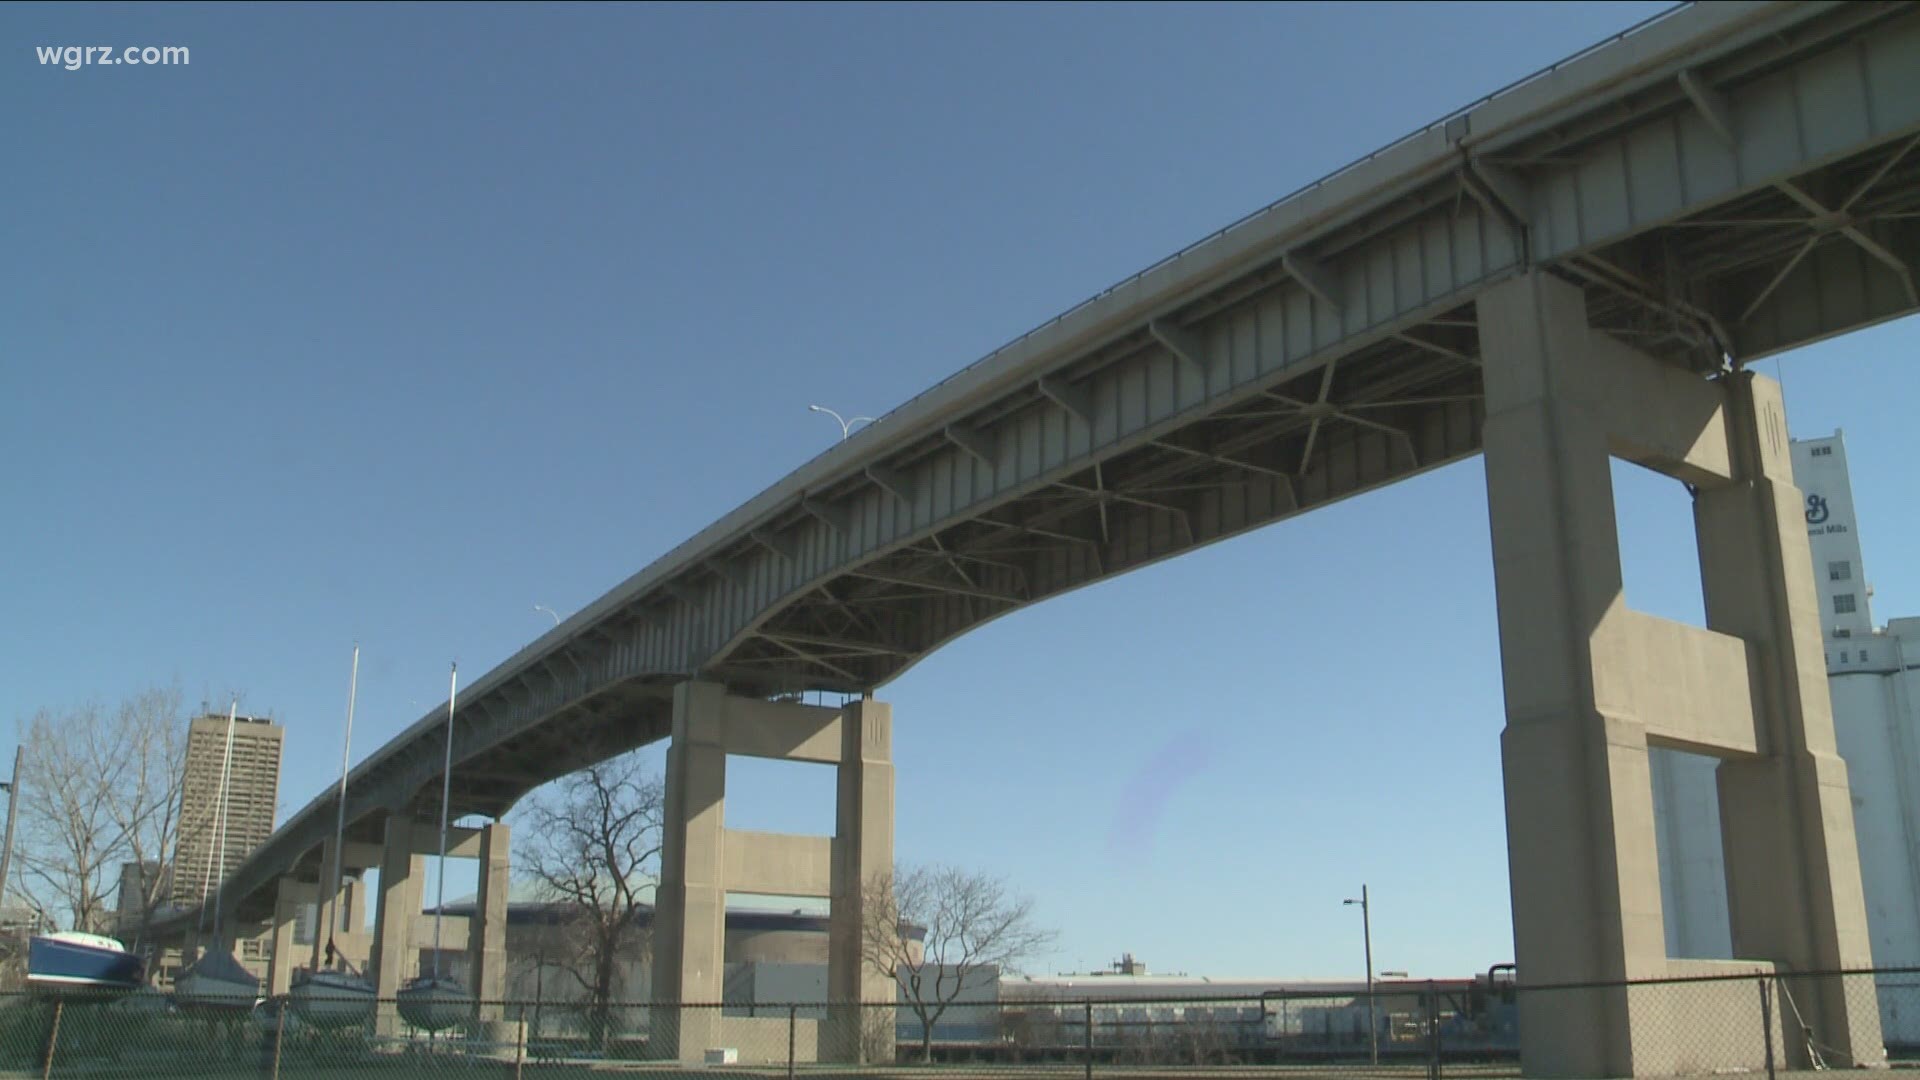 With calls for final plans to remove the Buffalo Skyway, there have been differing perspectives on any alternative routes for commuters who use the bridge.